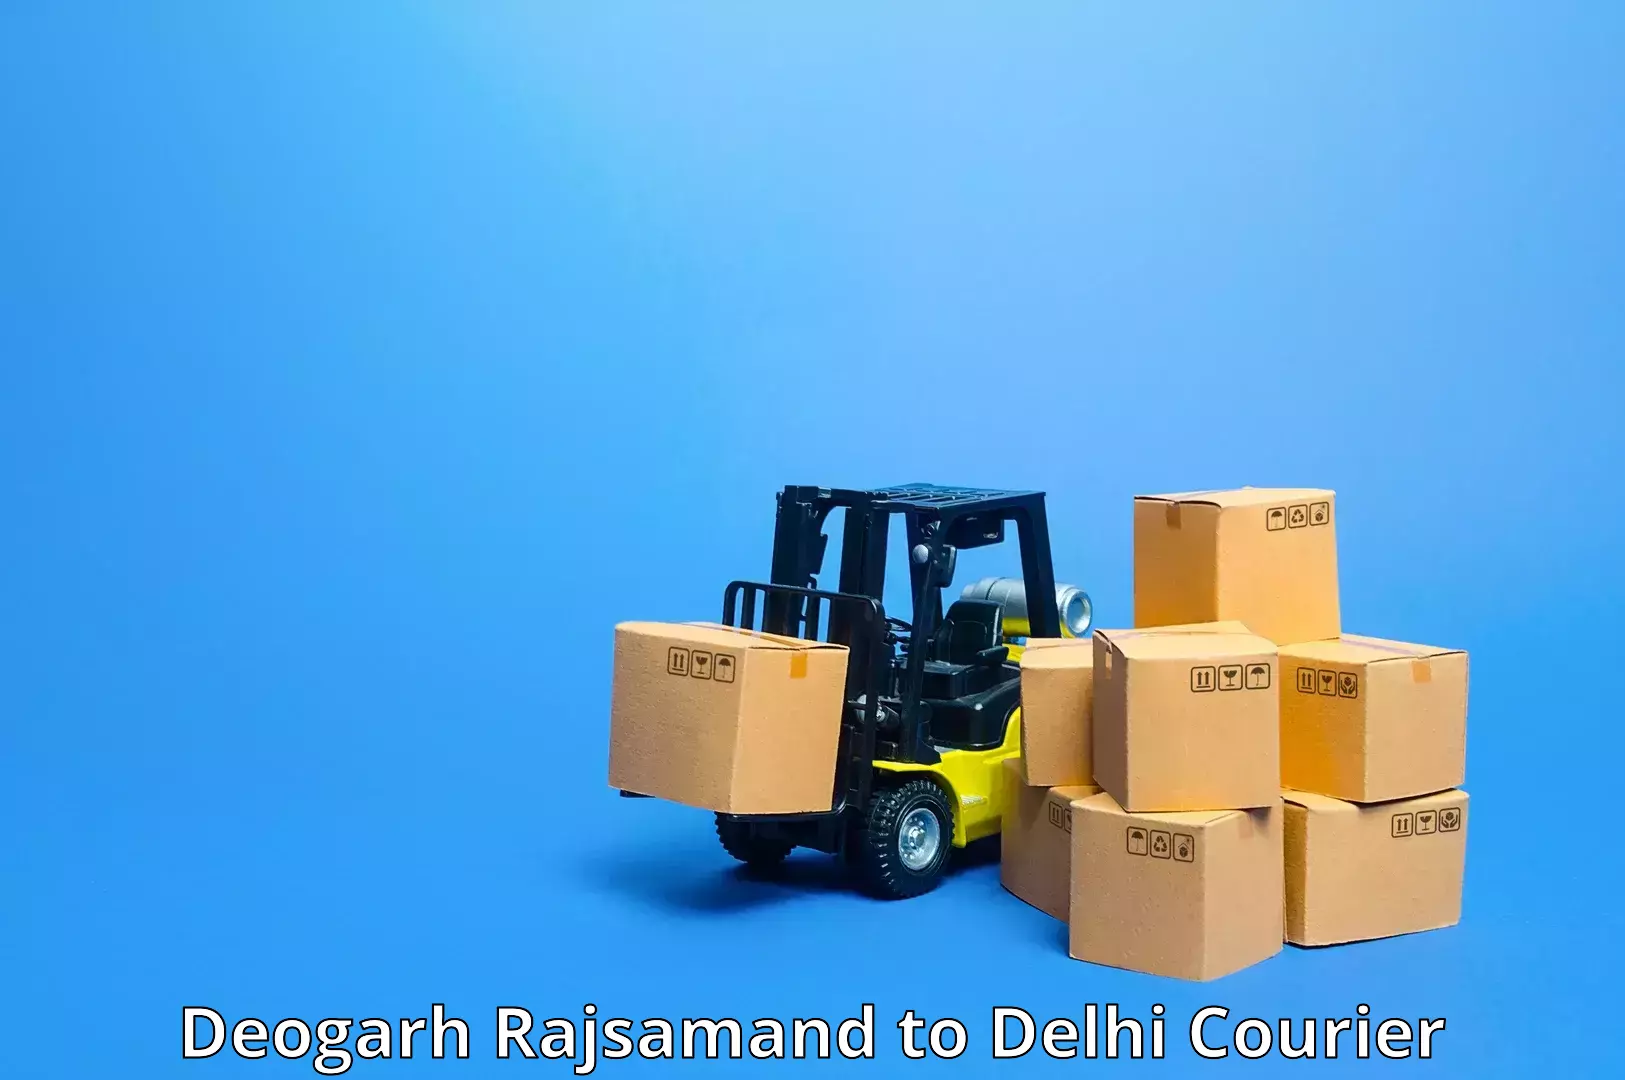 Express delivery network Deogarh Rajsamand to East Delhi